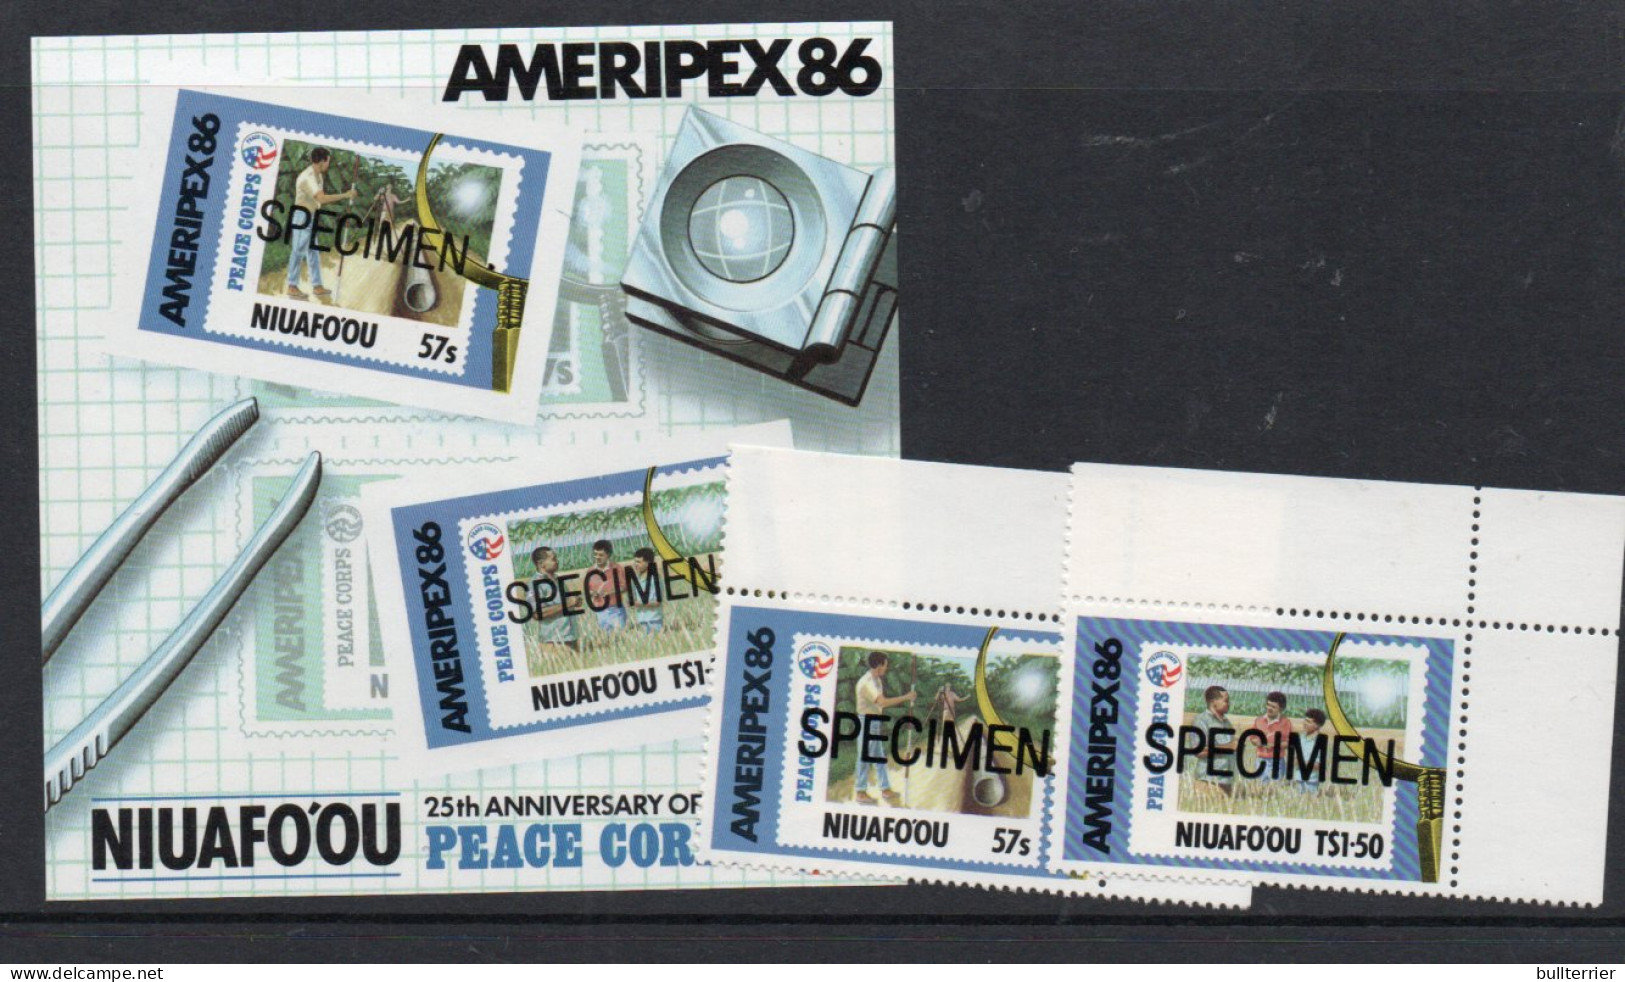 NIUAFOOU - 1986- AMERIPEX SET OF 2 + S/SHEET  " SPECIMENS"  MINT NEVER HINGED  - Oceania (Other)